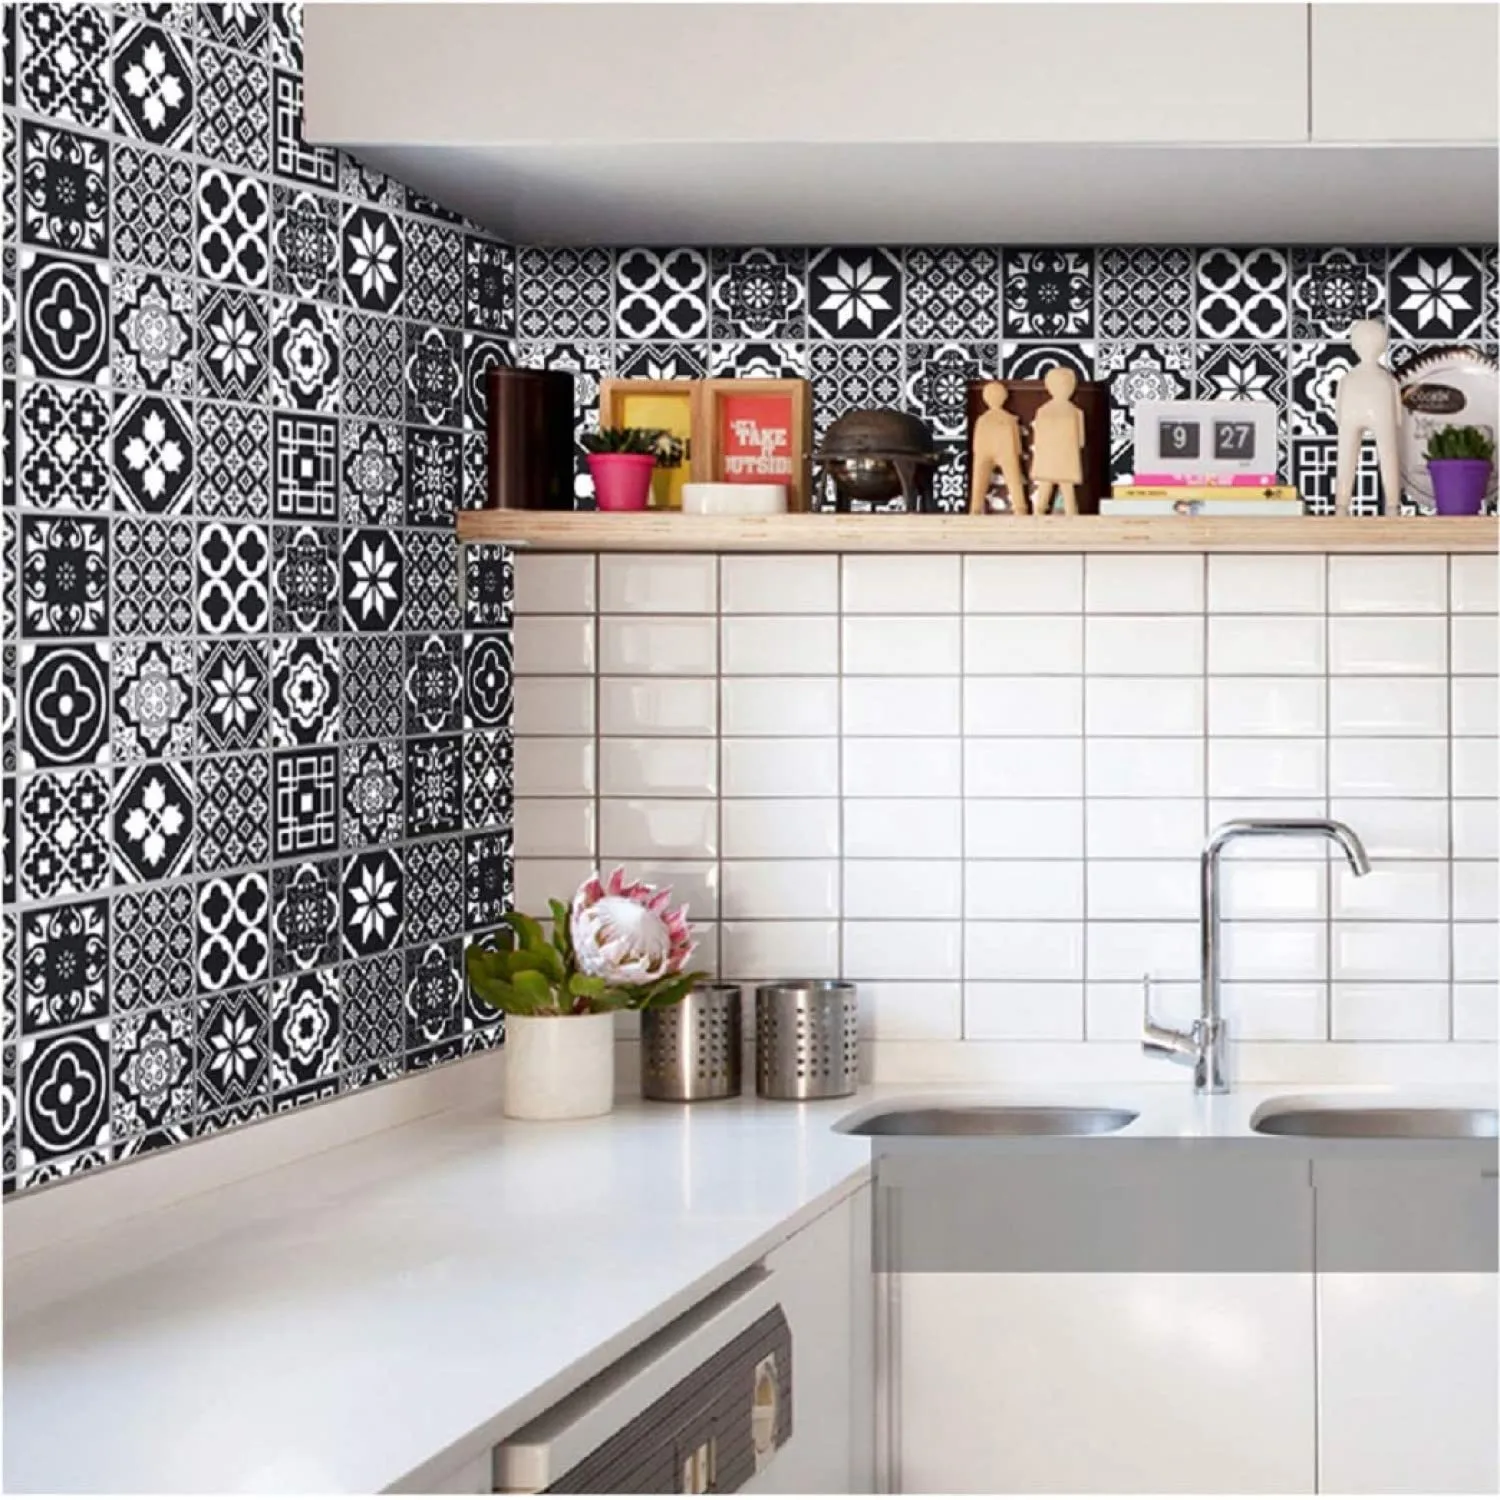 Pros and Cons of Ceramic Tiles in Kitchens